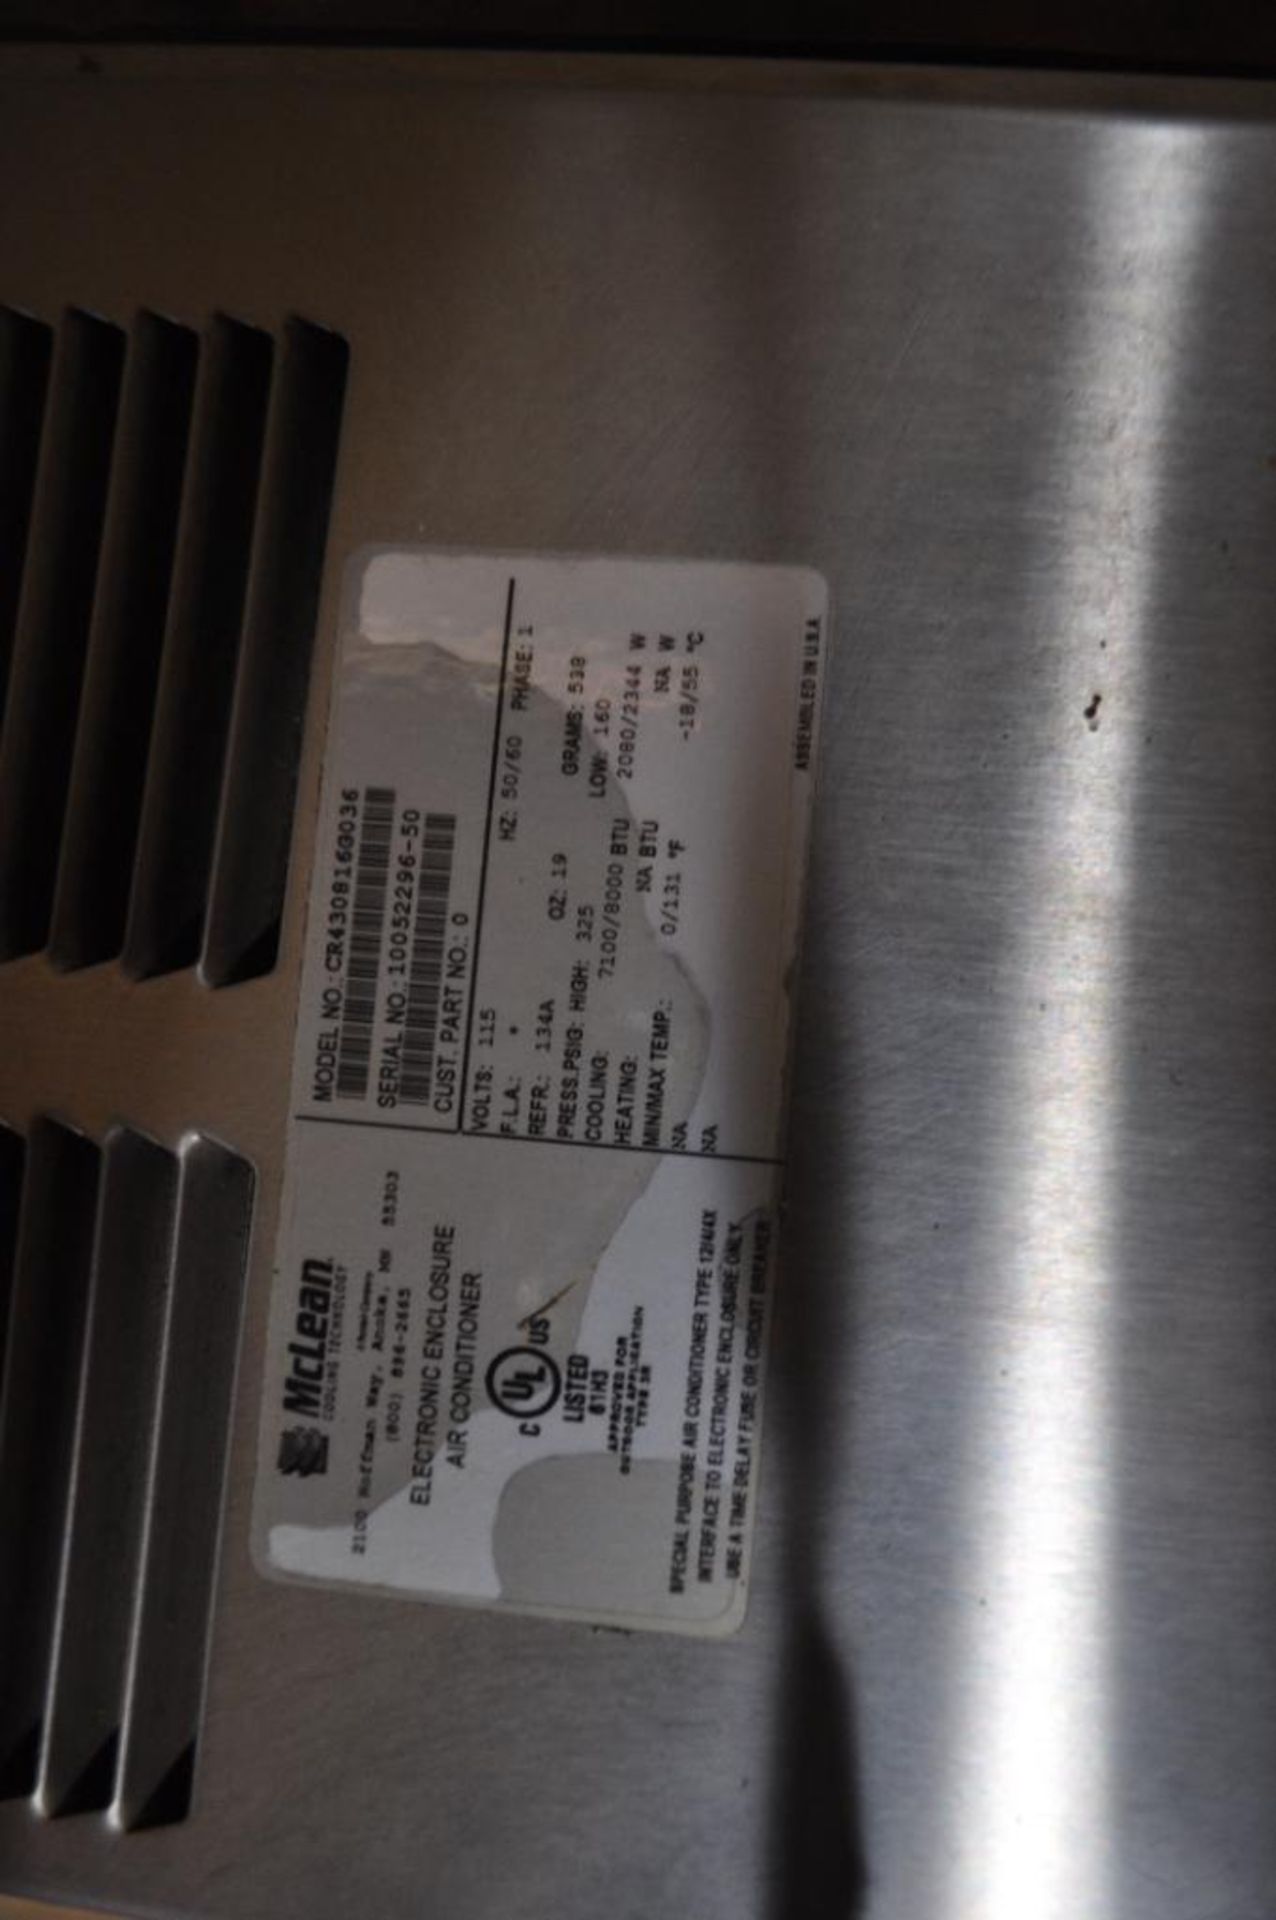 MCLEAN THERMAL STAINLESS ELECTRICAL PANEL AIR CONDITION UNIT, MODEL CR430816G036, 1-PH, 115 VAC - Image 4 of 6